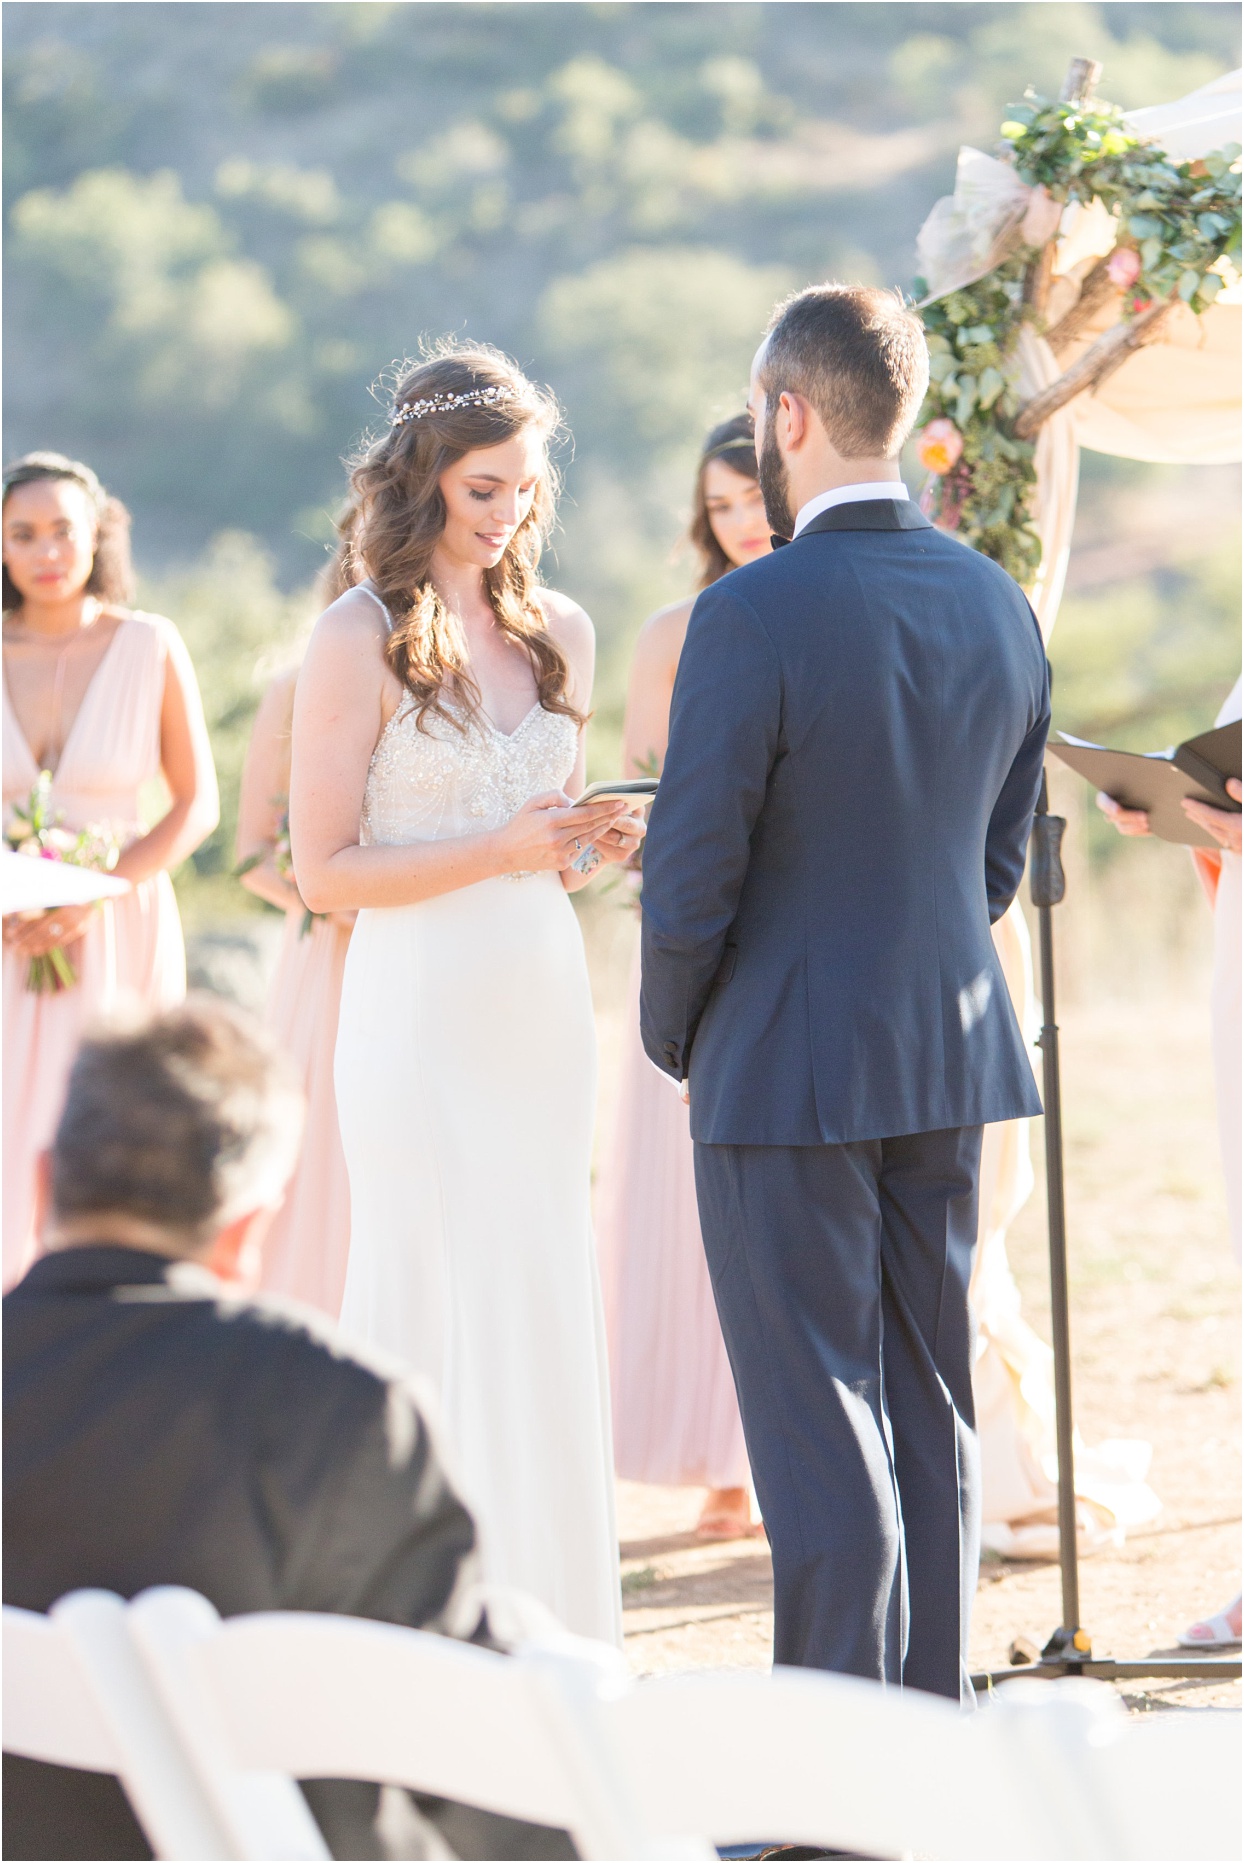 How To Shoot A Wedding Ceremony With the Sun Behind the Couple | For Photographers | Photography Tips & Tricks | Laura & Rachel Photography